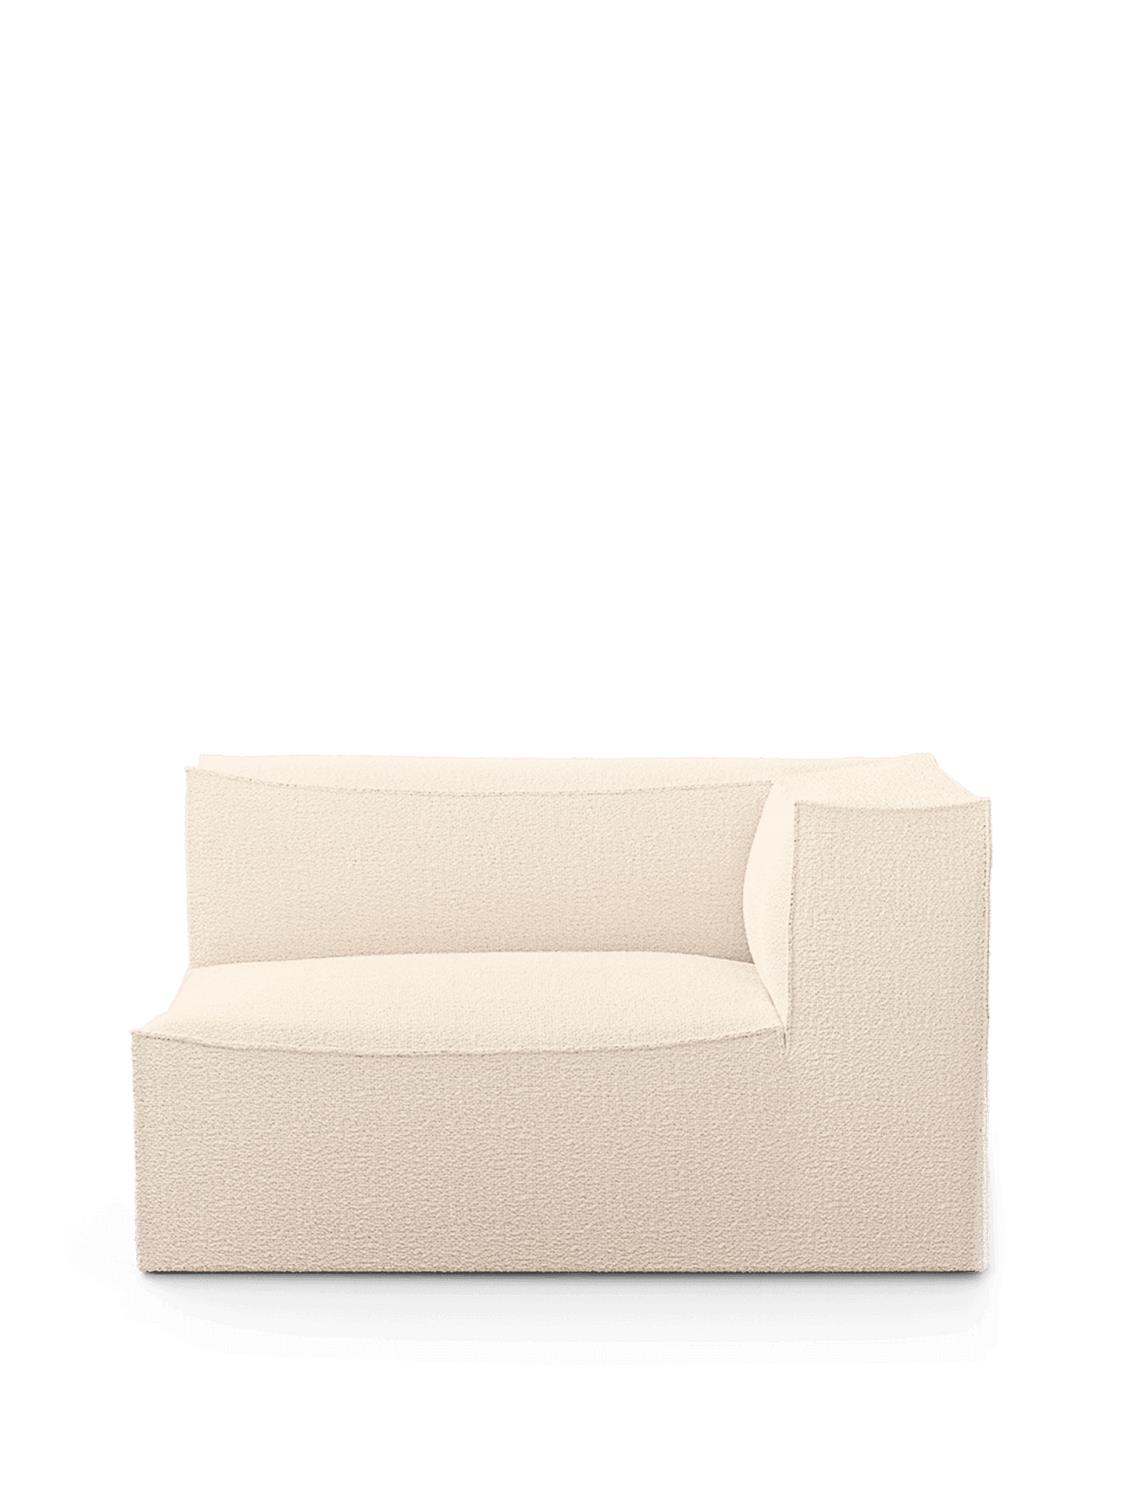 Ferm Living - Catena Armrest R L401 - Wool Boucle - Off-White